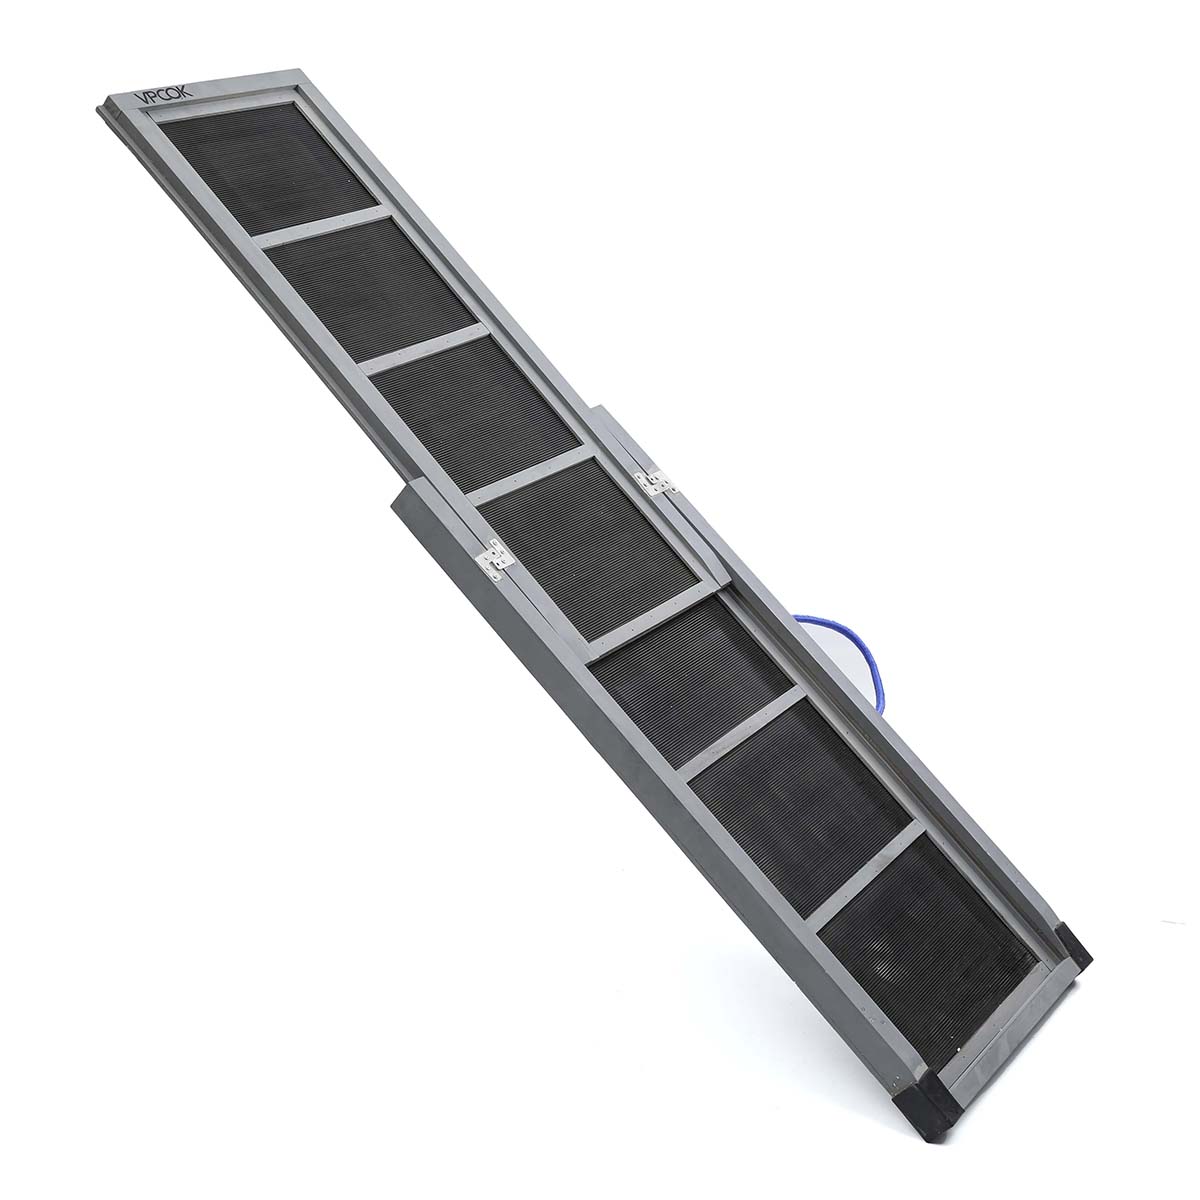 

Dog Ramps Telescoping Non-Slip Stable Wooden Extension Pet Ladder for Steep Inclines Compact Portable Car Storage Boat Ladder